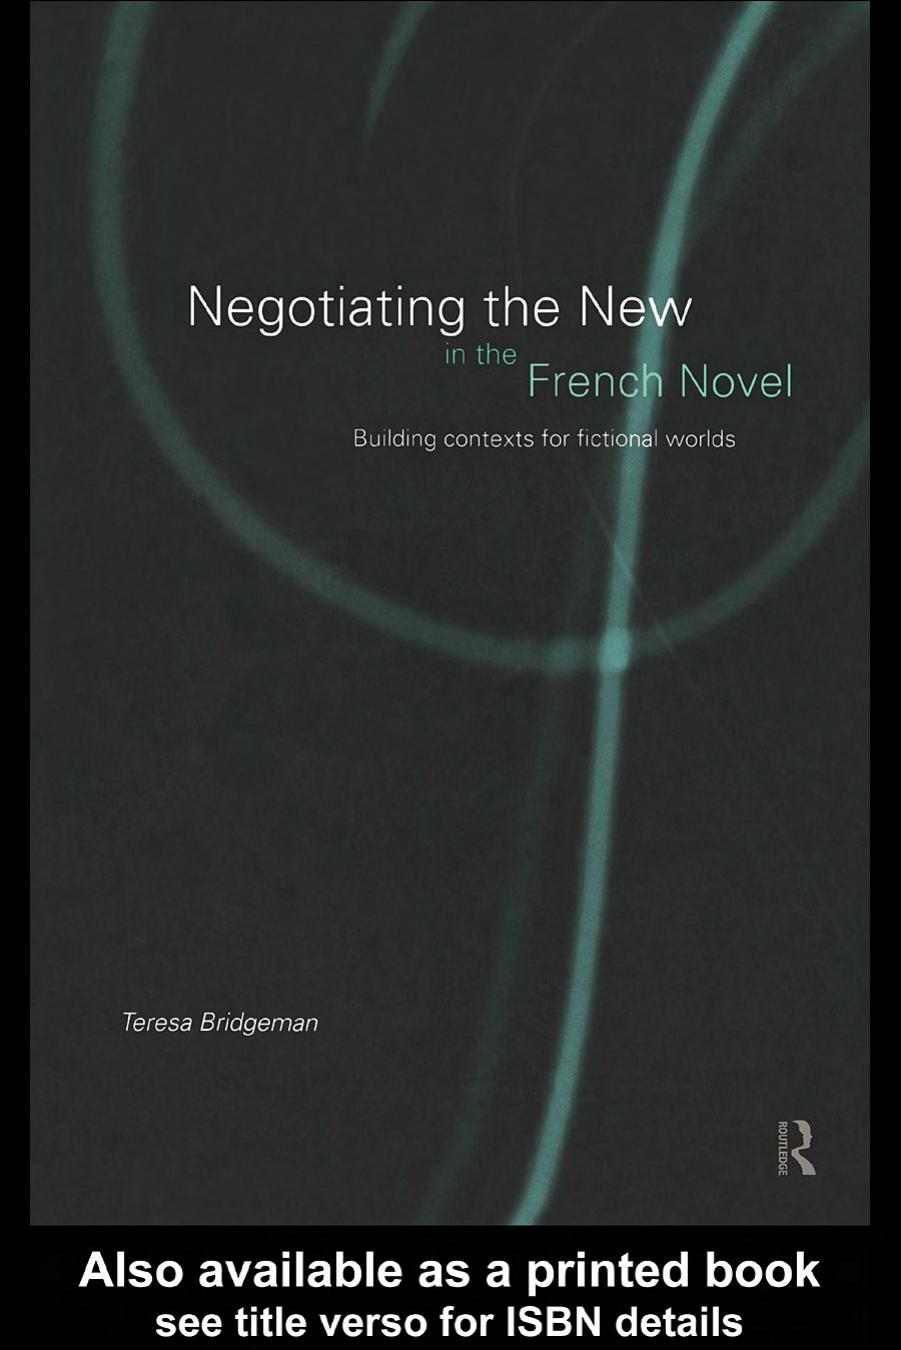 Negotiating the New in the French Novel: Building Contexts for Fictional Worlds